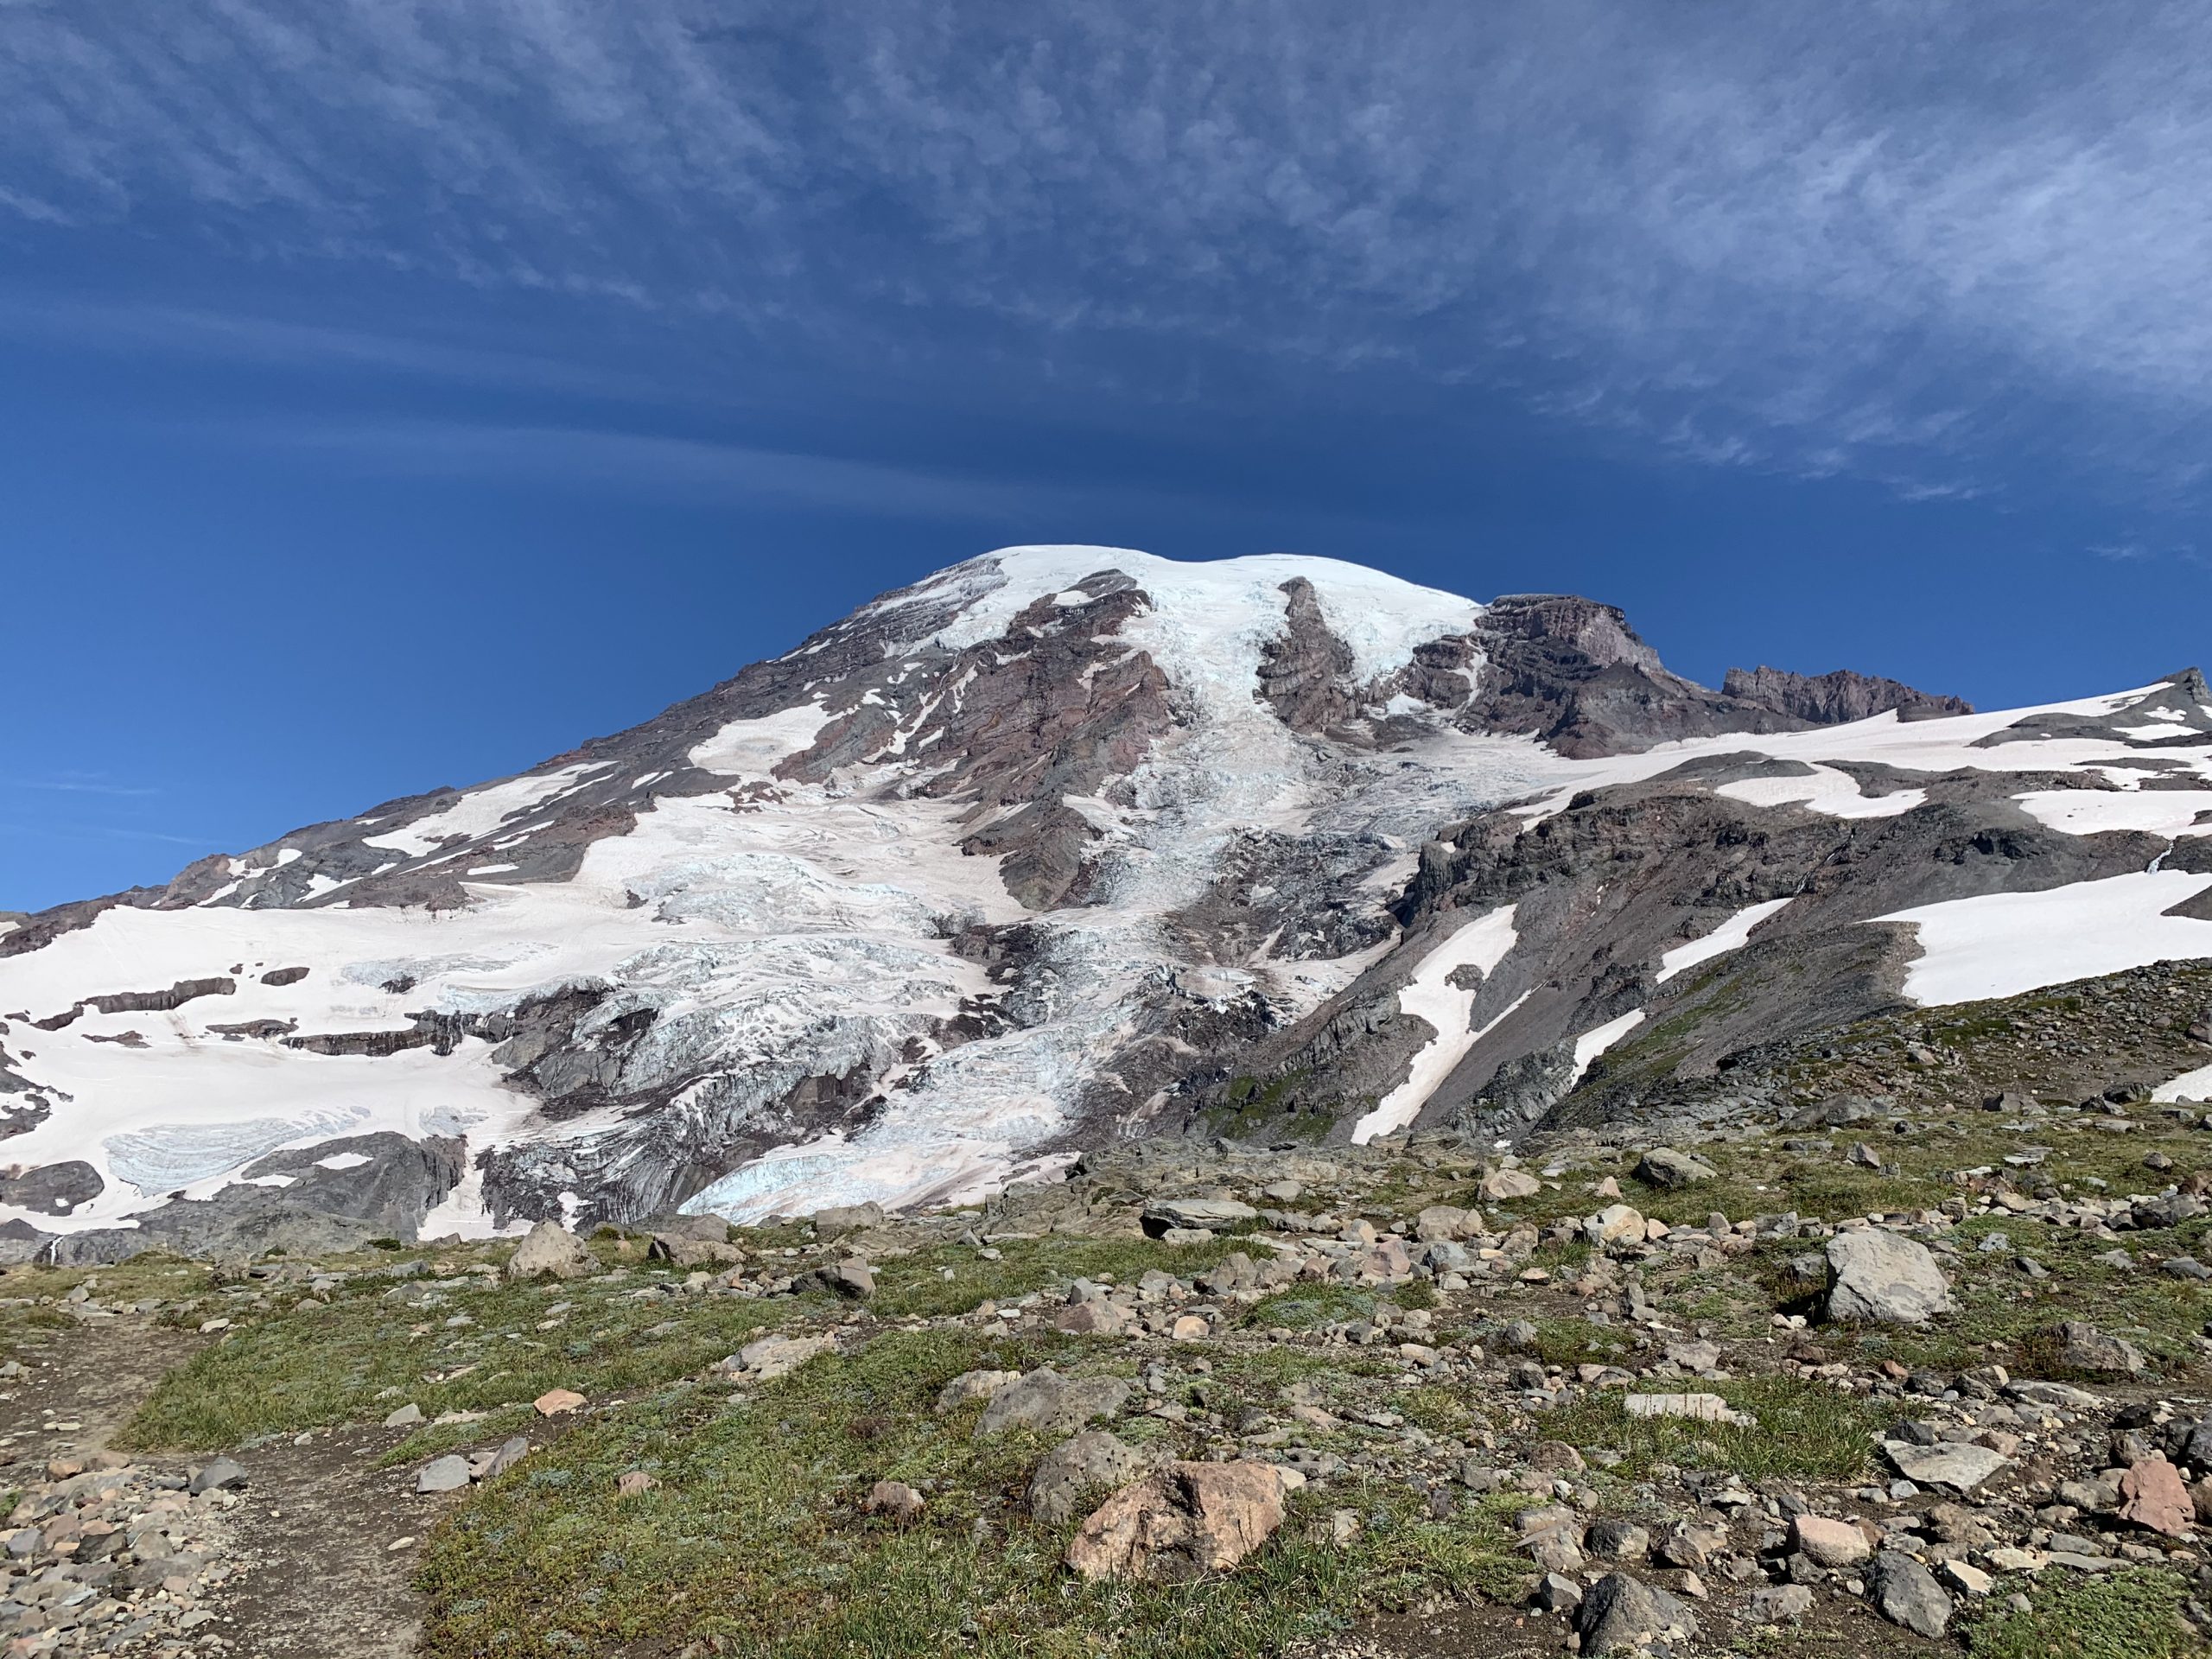 View of Mount Rainier from Panorama Point in the Mount Rainier National Park.